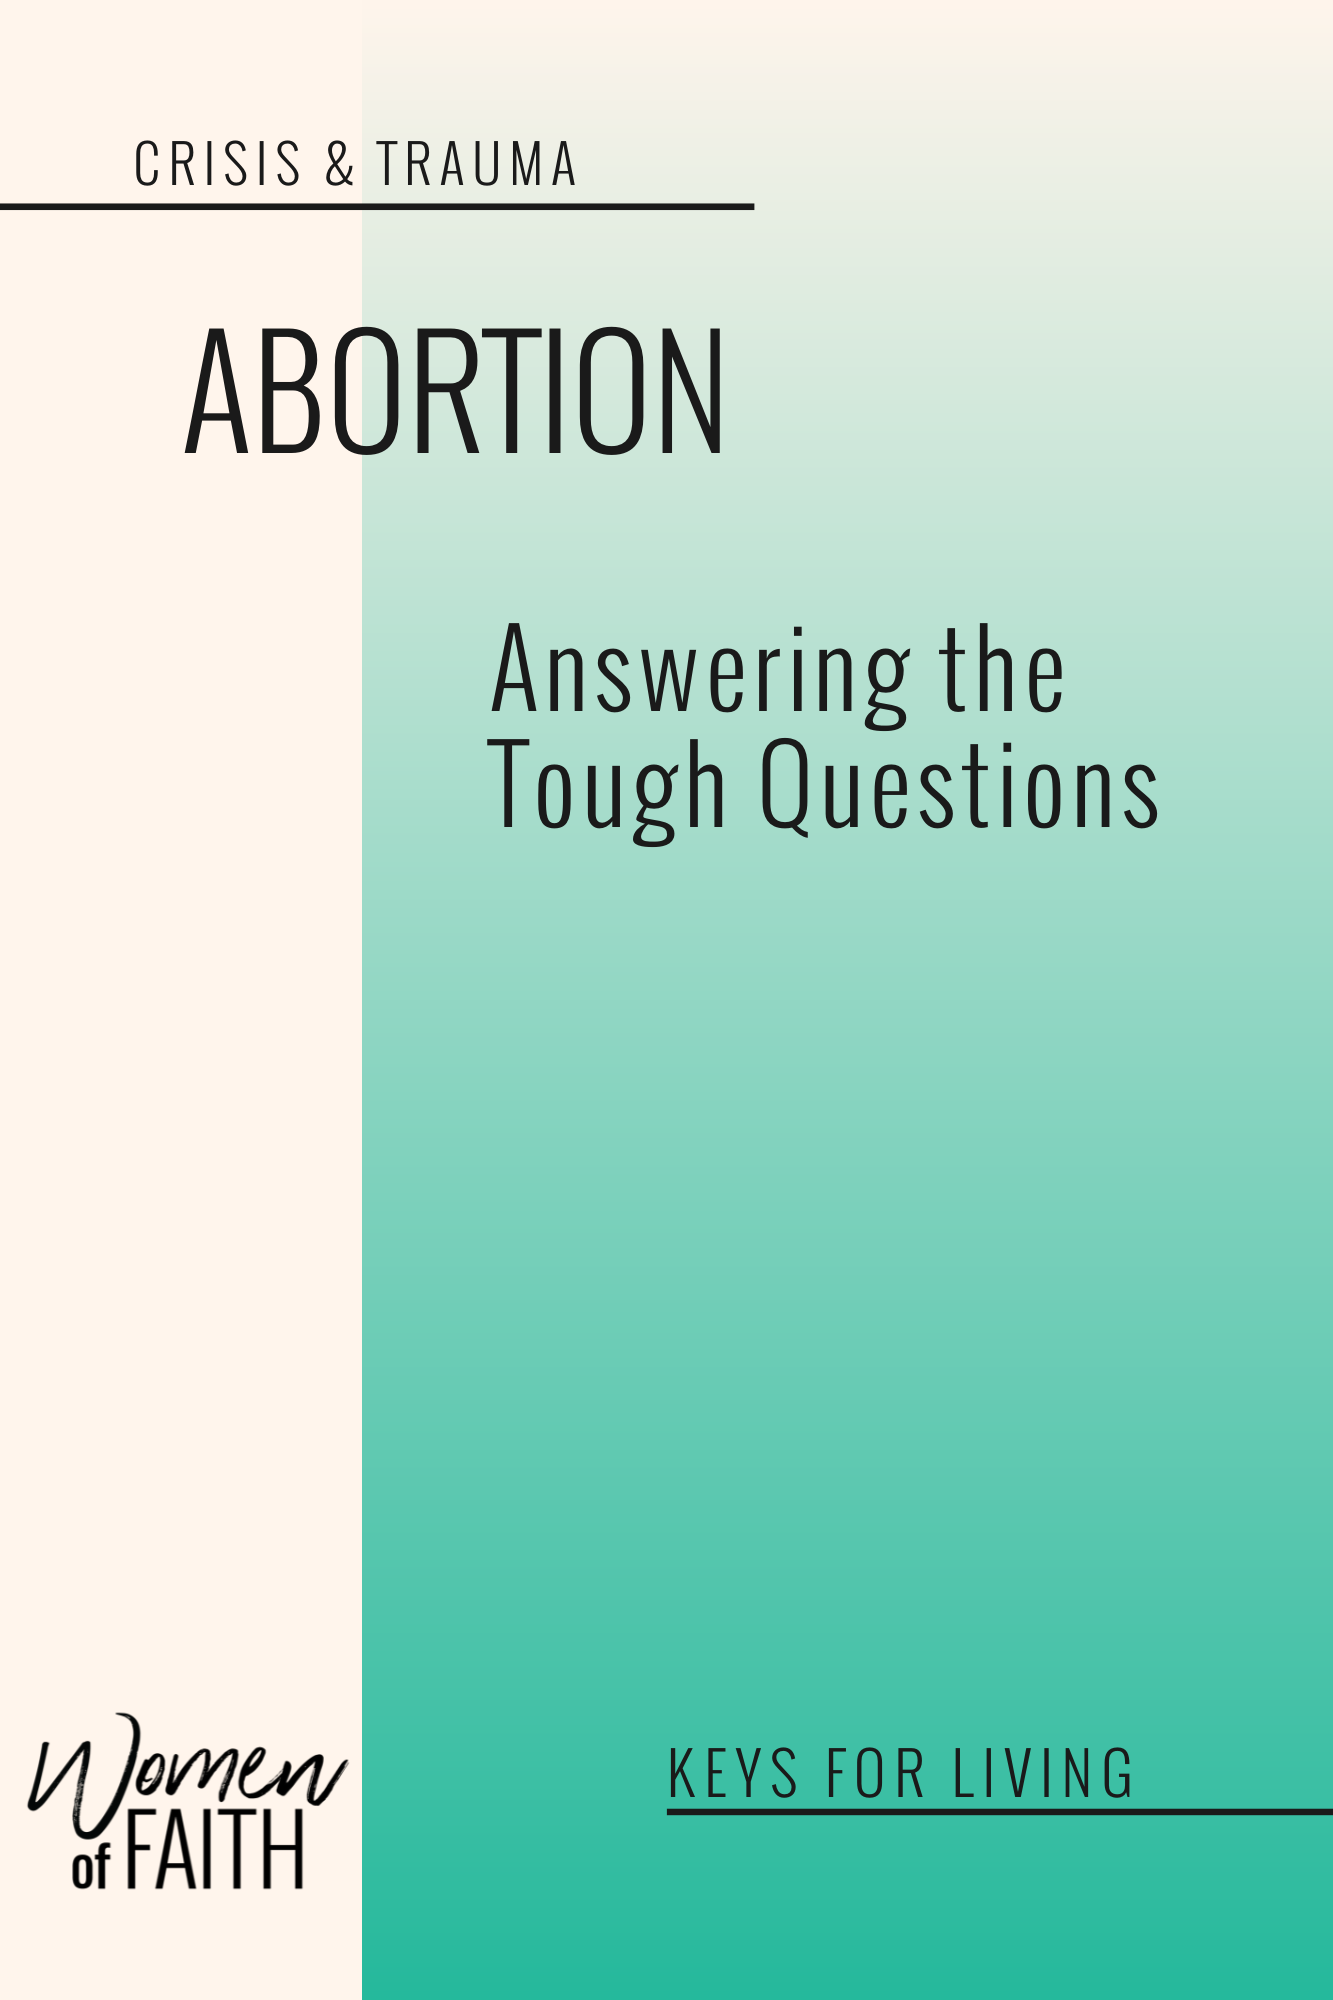 ABORTION: The Abortion Dilemma - ANSWERING THE TOUGH QUESTIONS  (E-BOOK)